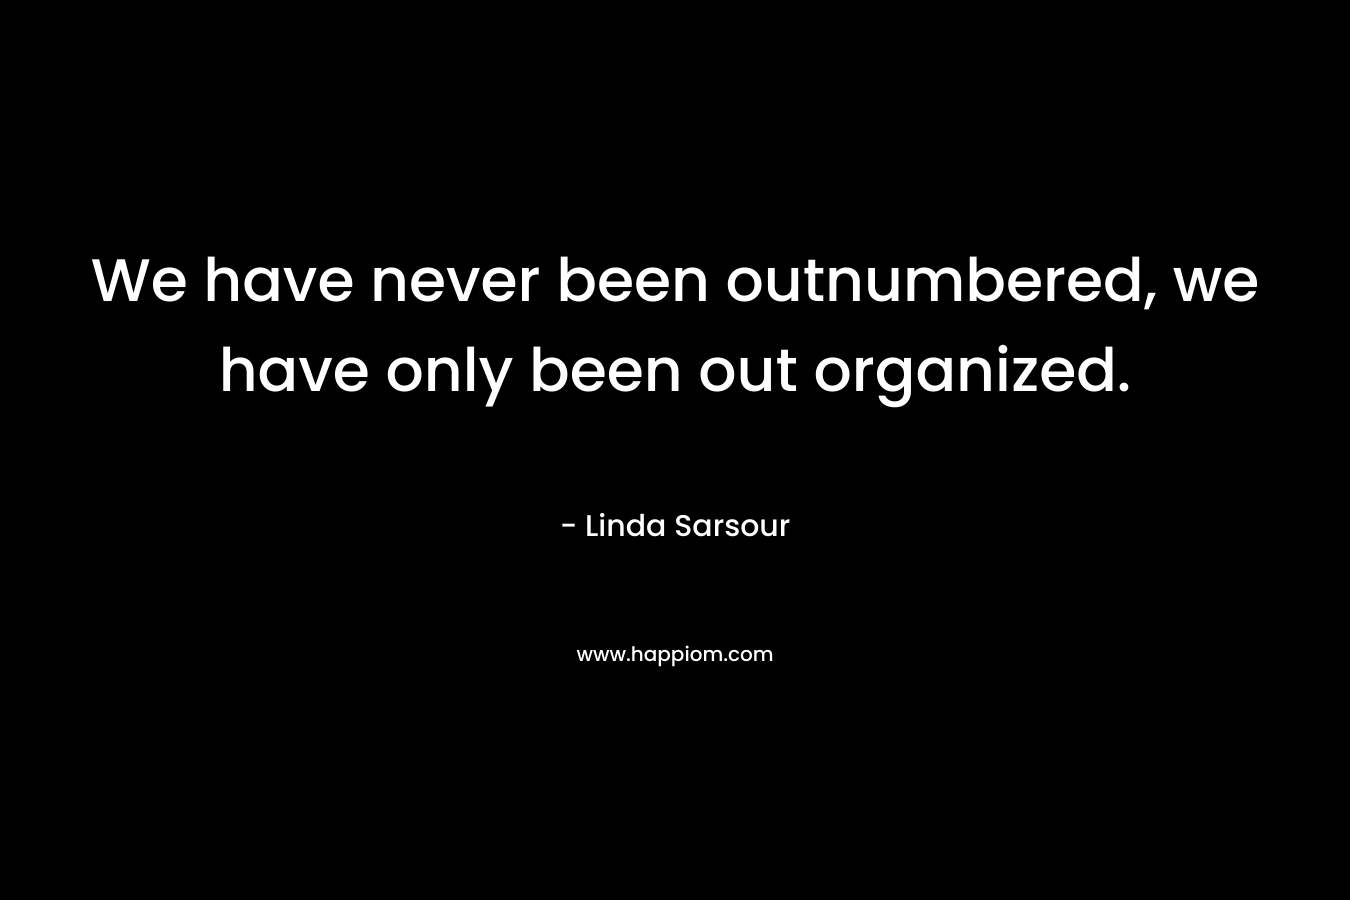 We have never been outnumbered, we have only been out organized. – Linda Sarsour